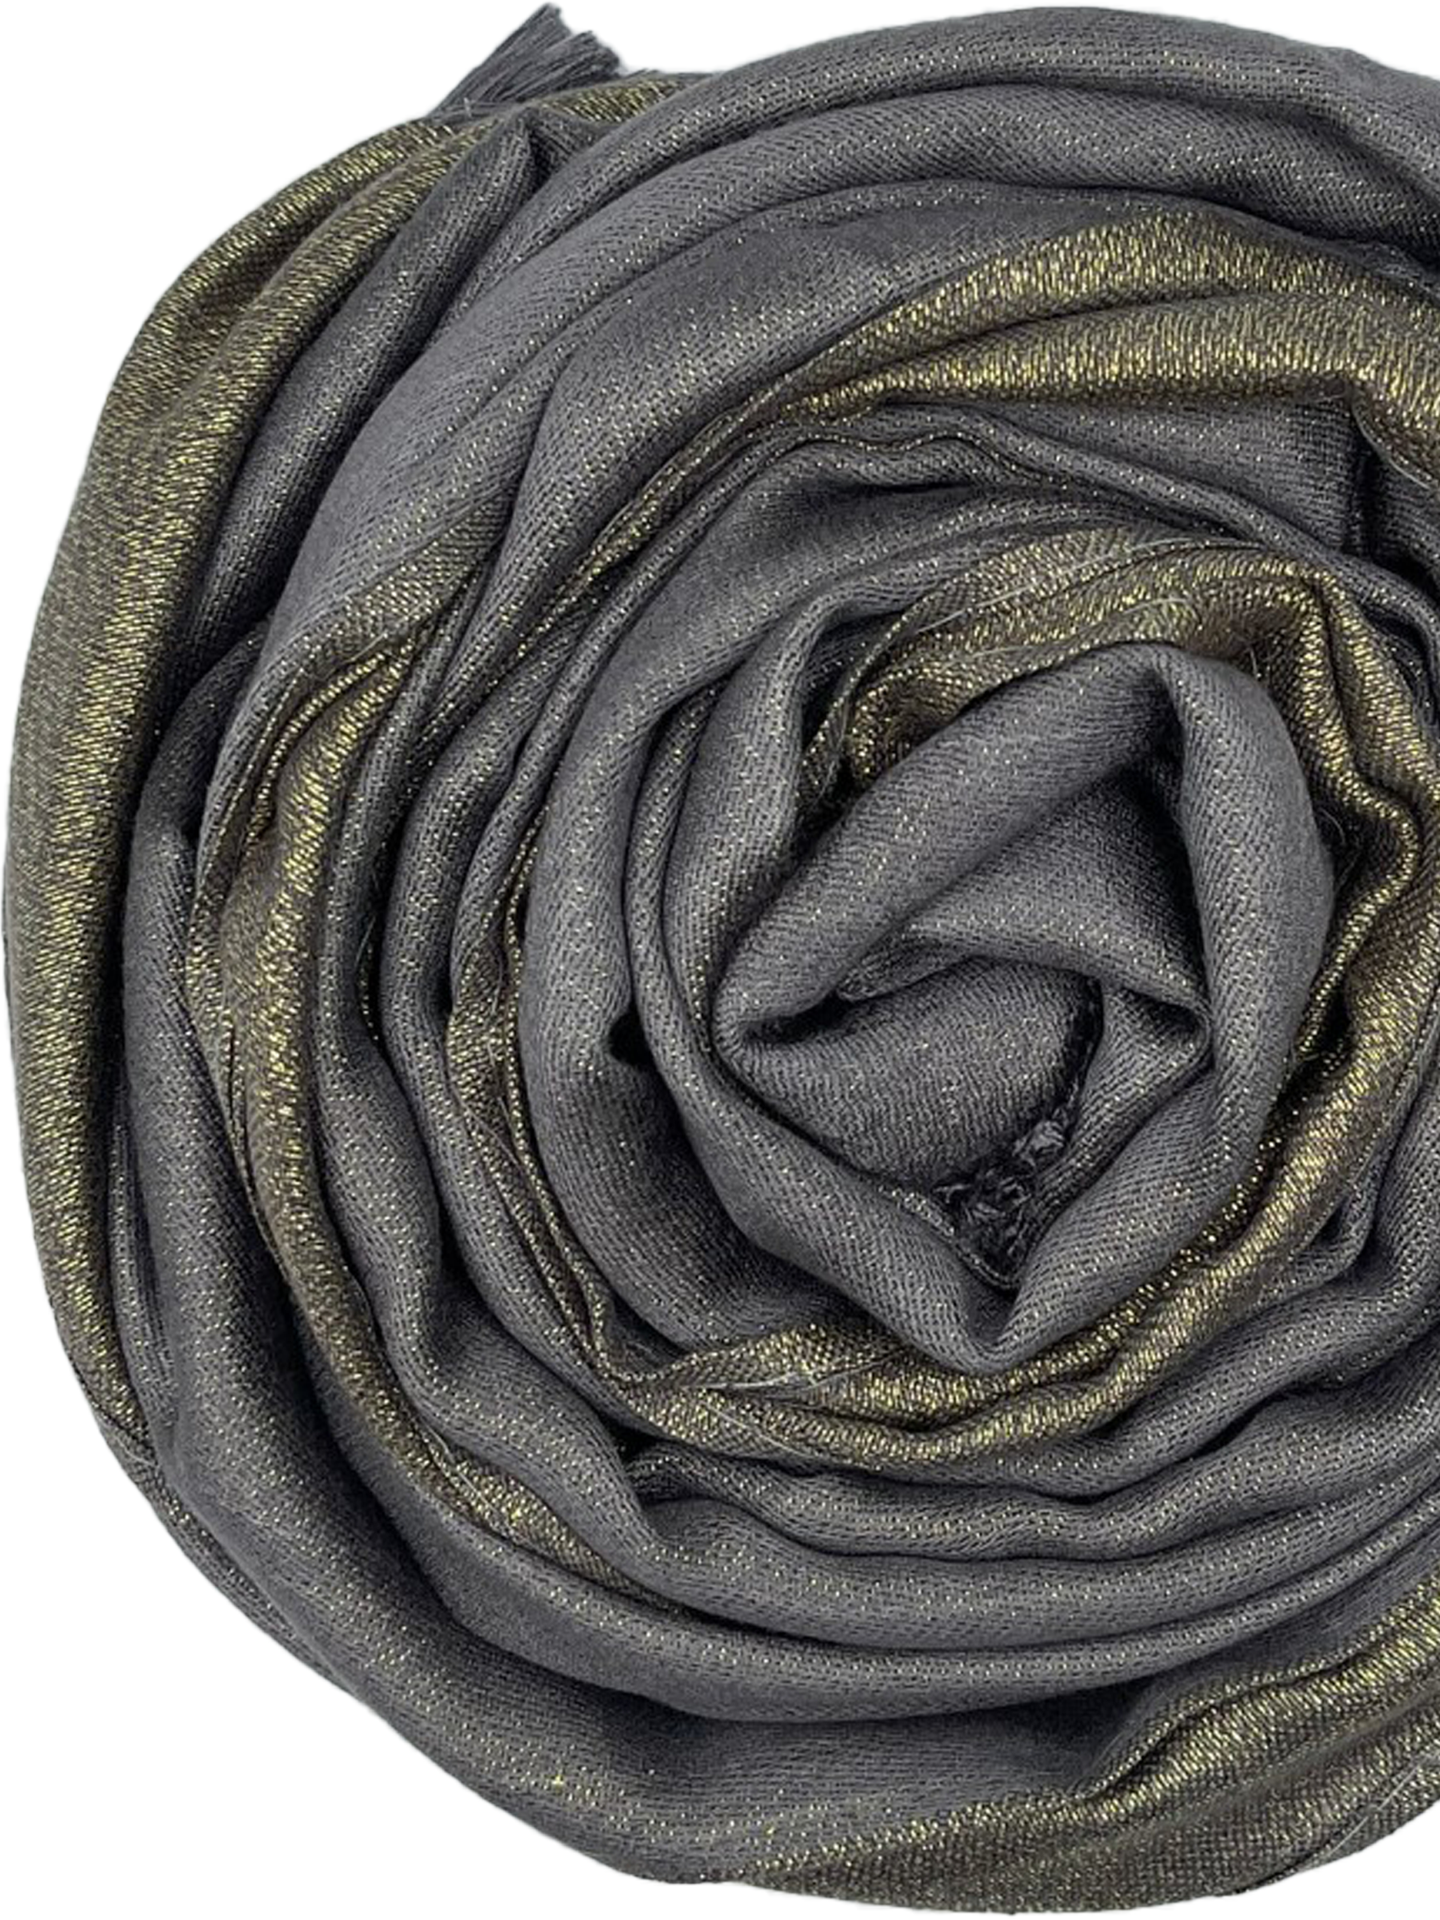 Glamour Scarf - Gray